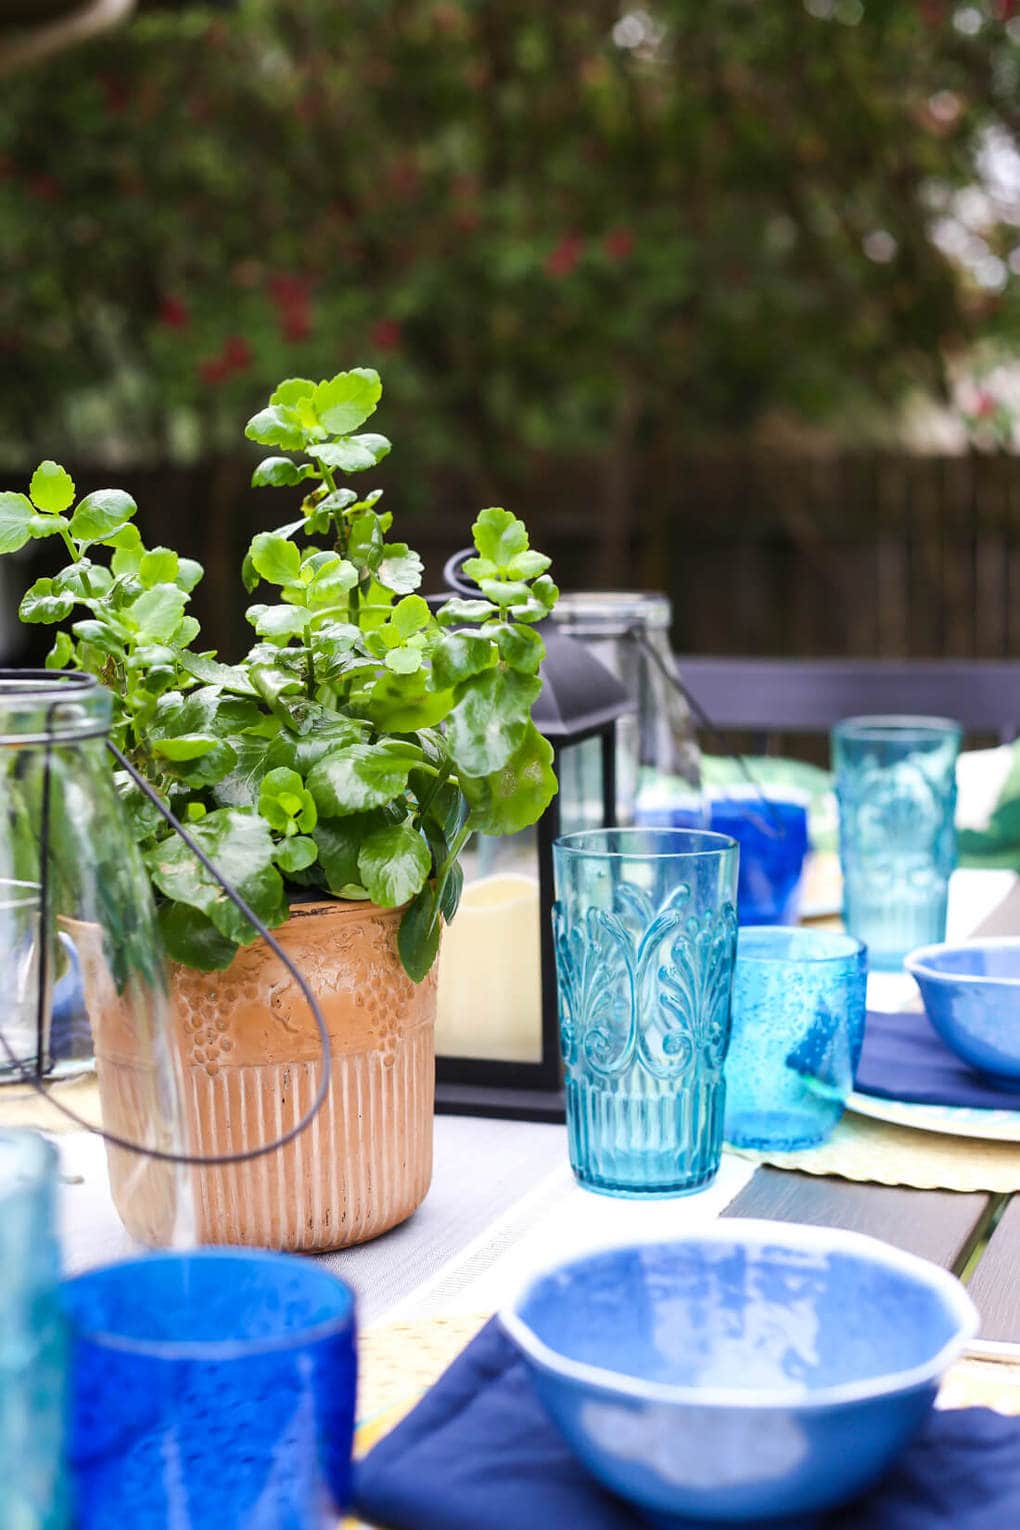 Quick tips, tricks, and ideas for a summer tablescape from 7 different blogs. Great inspiration for a beautiful table setting for your home this summer.